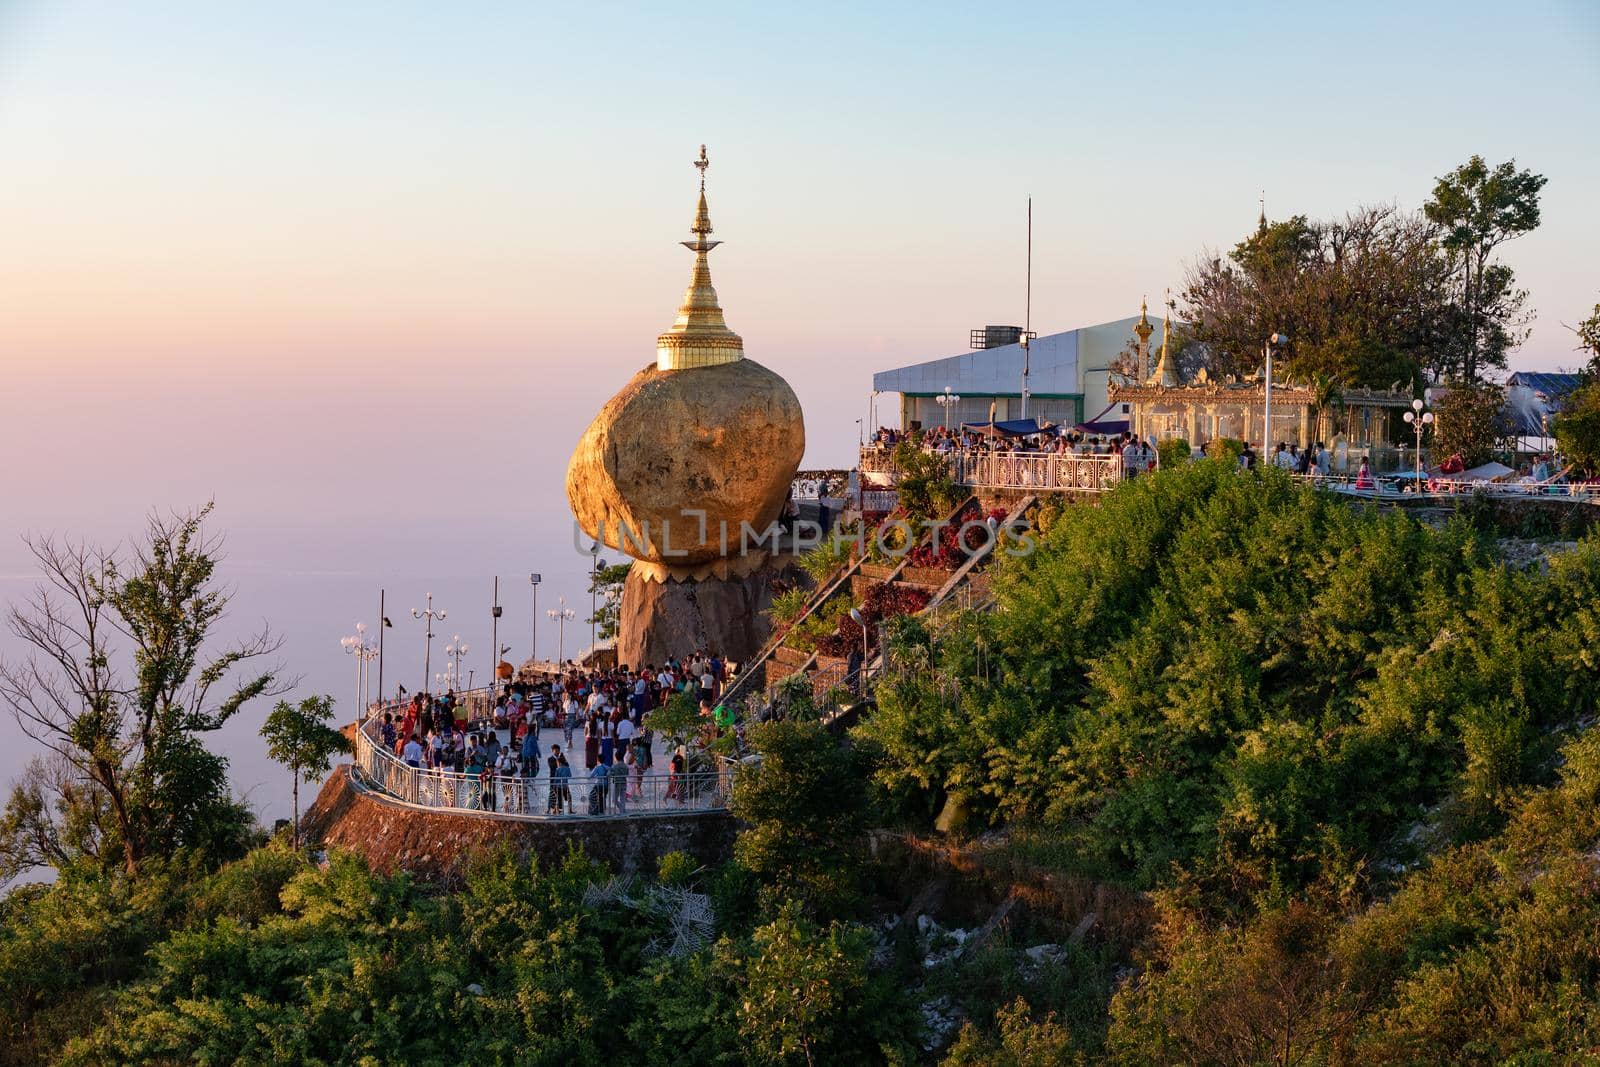 The Golden Rock in Myanmar, which, according to legend, is held by only one hair of the Buddha